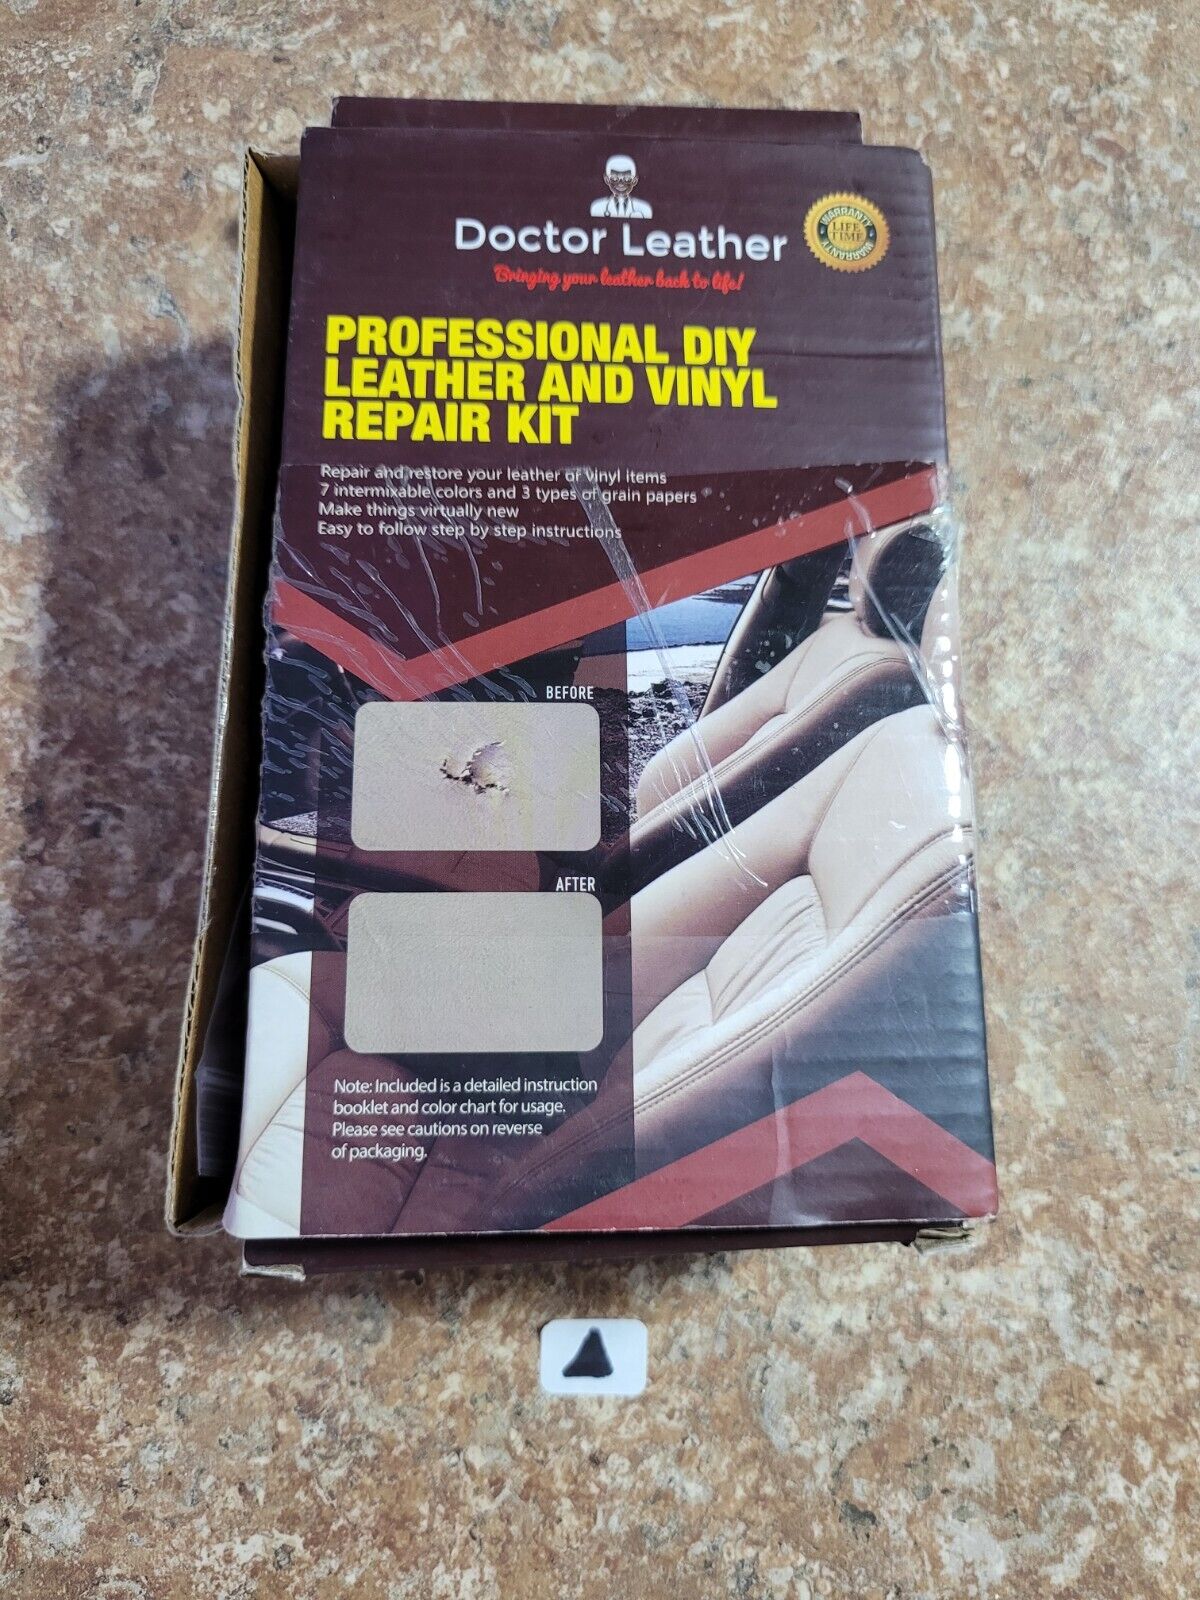 How To Restore Leather: Simple Leather Restoration Guide